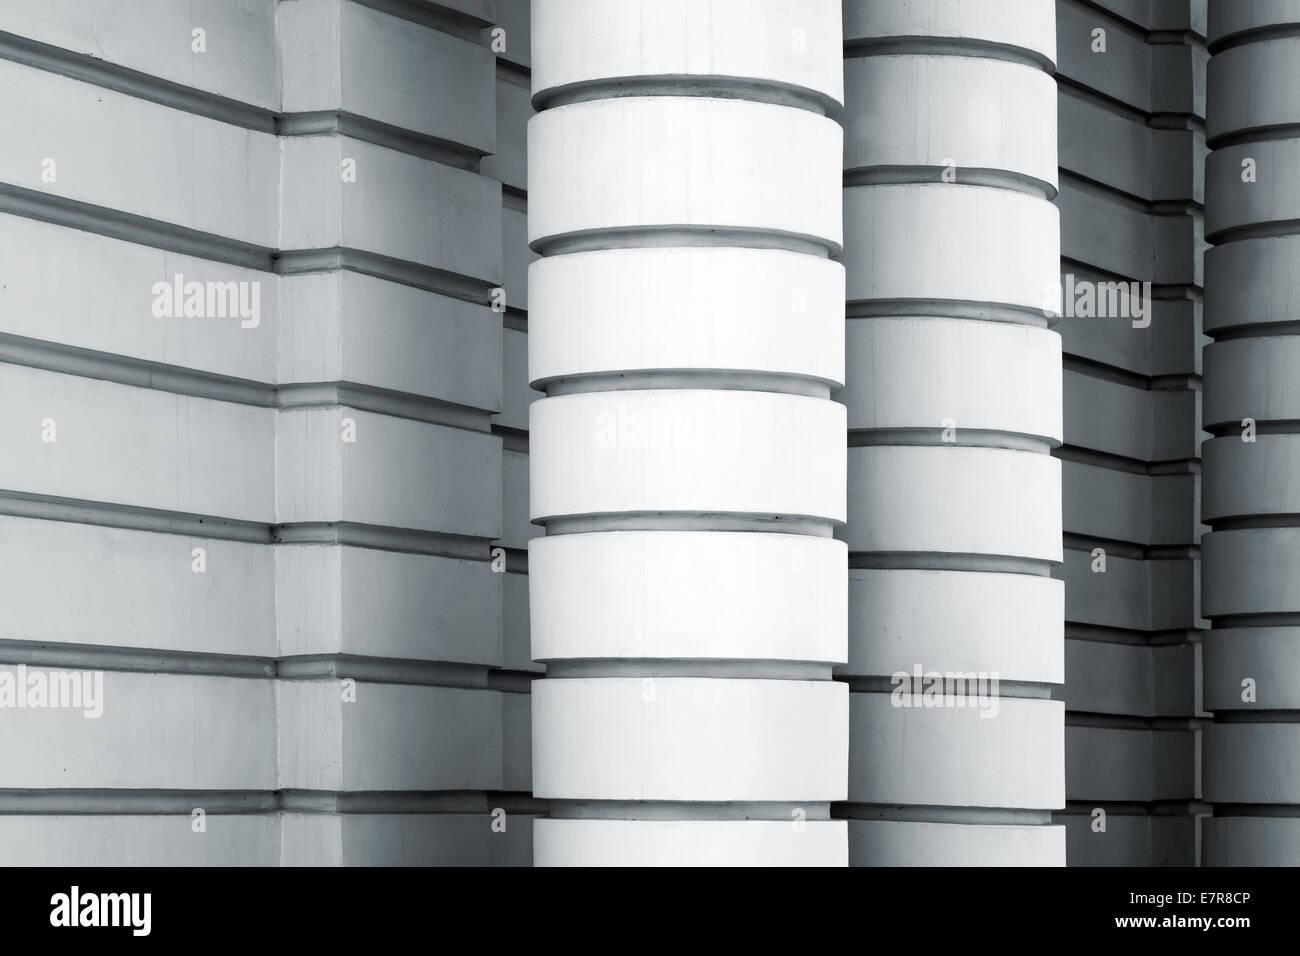 White columns and walls, abstract architecture Stock Photo